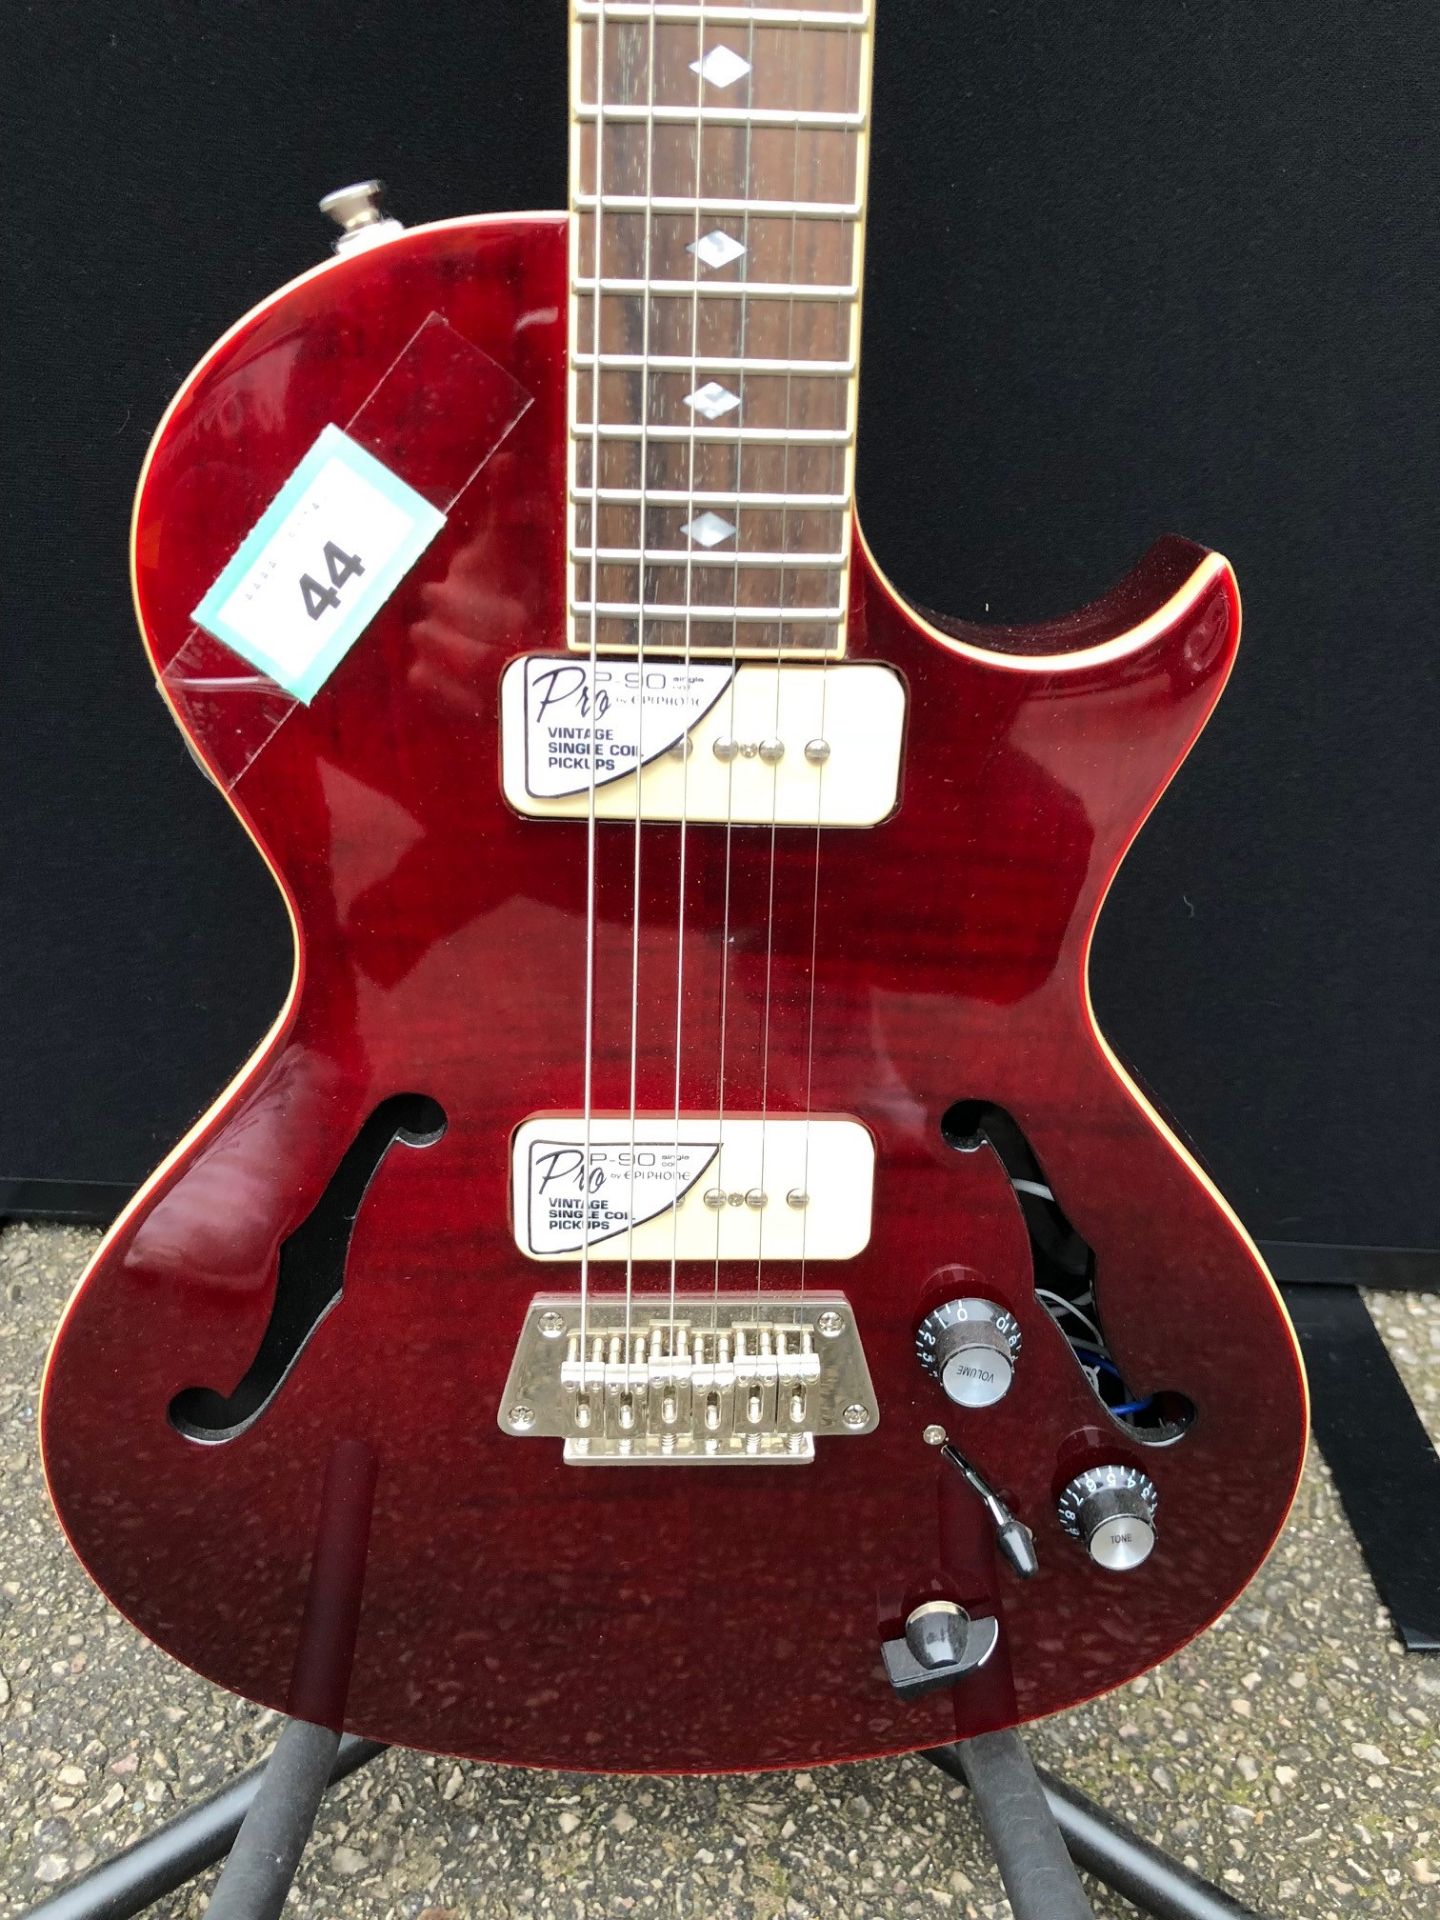 Epiphone Blueshawk Deluxe Wine Red Electric Guitar (Brand New Ex Display - RRP £499.00) - Image 2 of 6